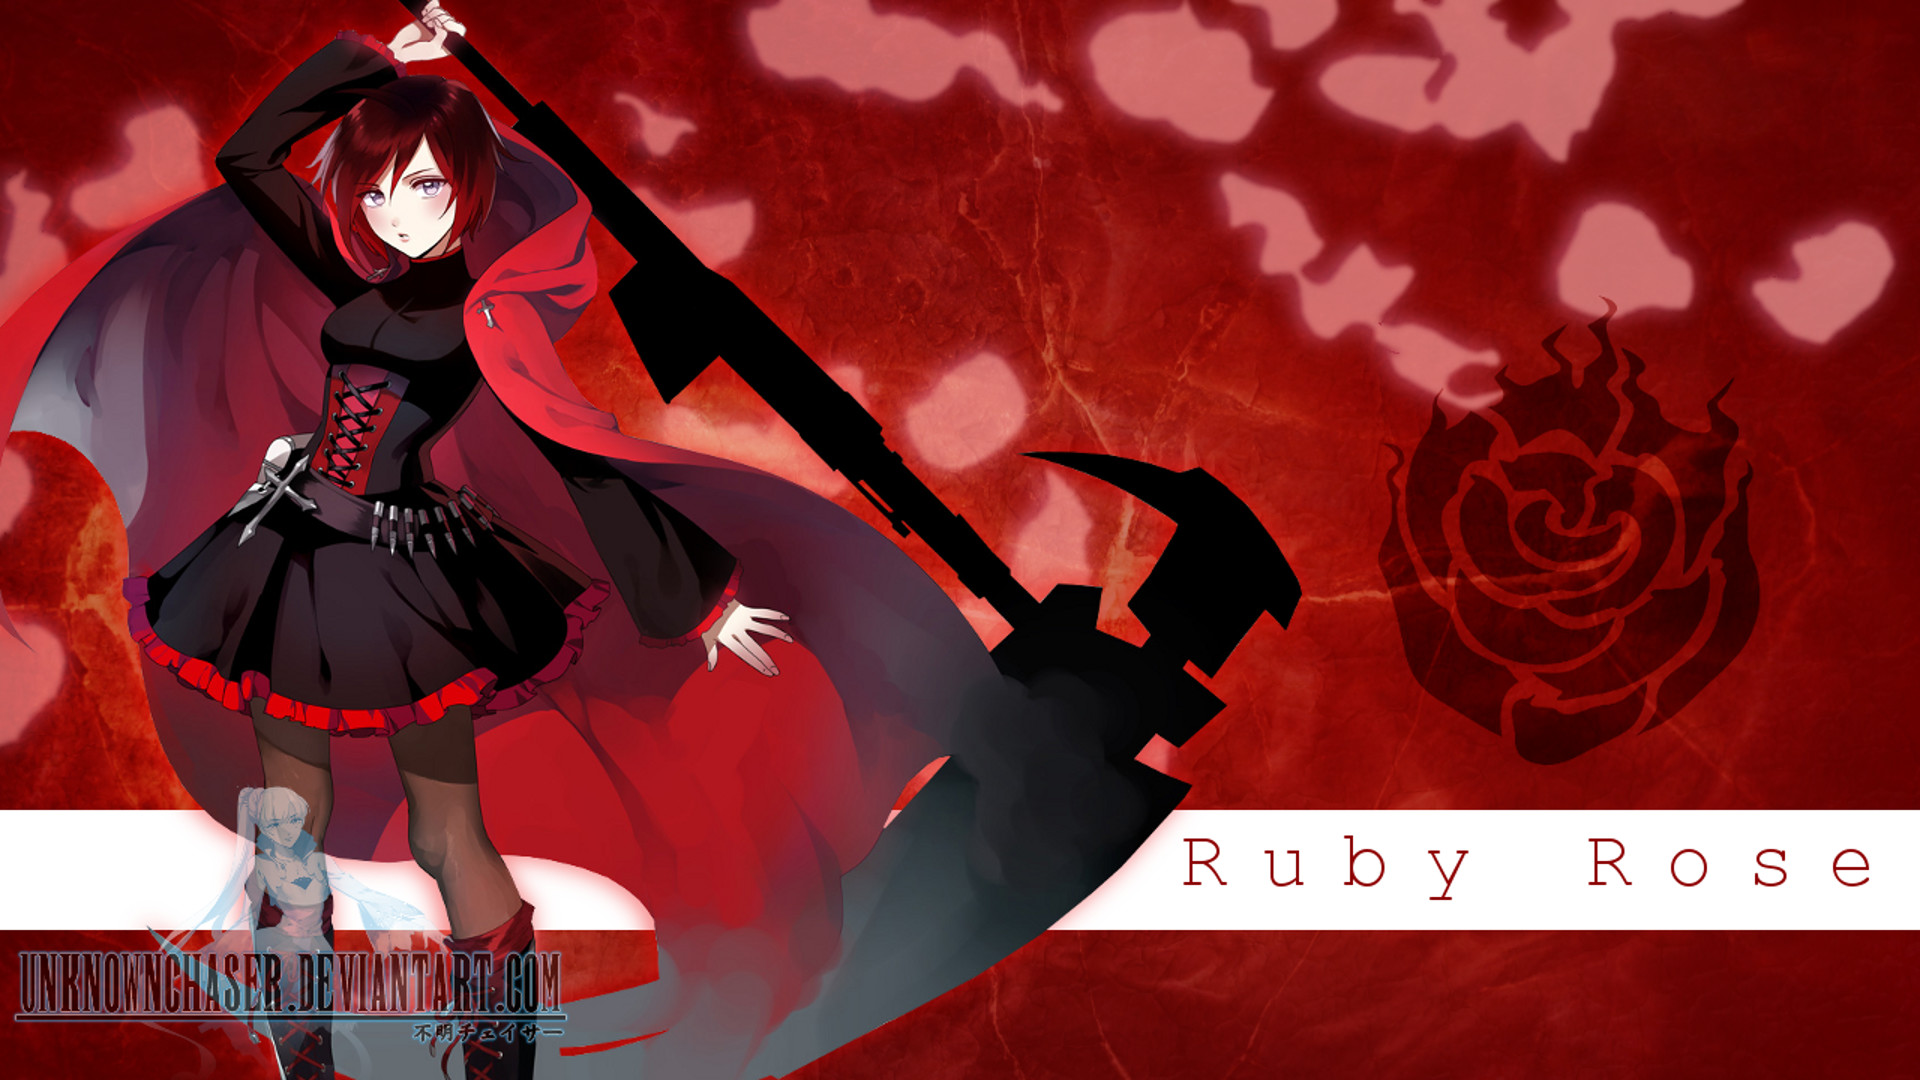 1920x1080 RWBY - Ruby Wallpaper by UnknownChaser on DeviantArt